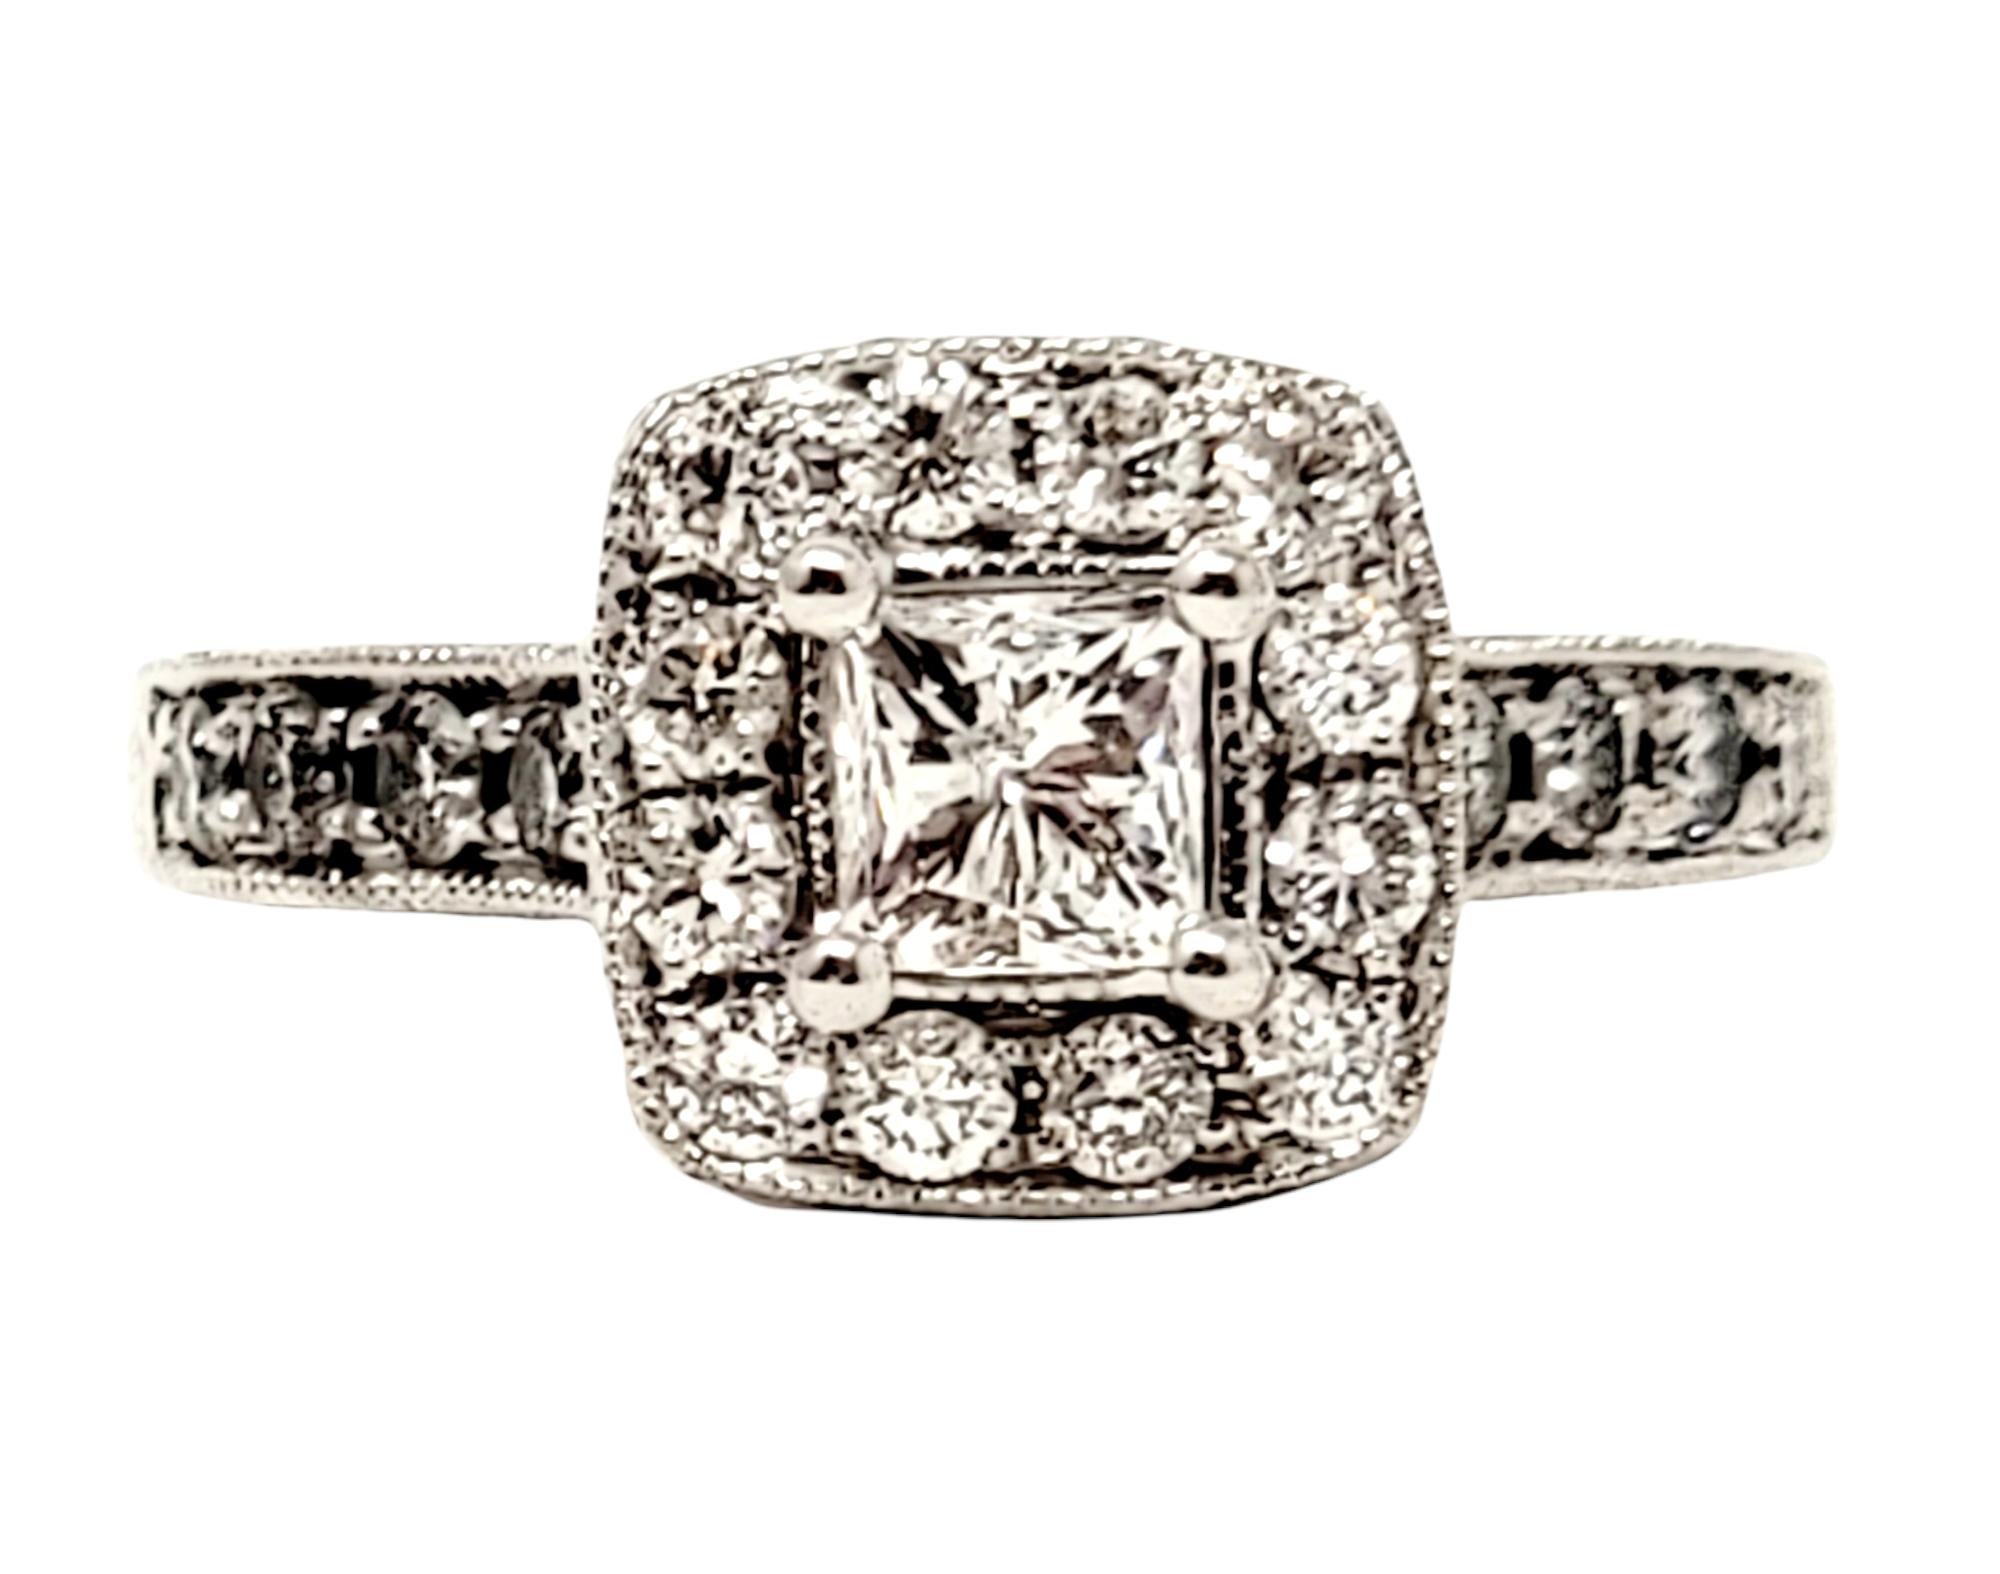 Ring size: 4.5

Breathtaking princess cut diamond halo engagement ring will absolutely radiate on her finger. The sparkling cushion center stone is paired with a glittering halo of round brilliant diamonds, allowing this ultra feminine piece to